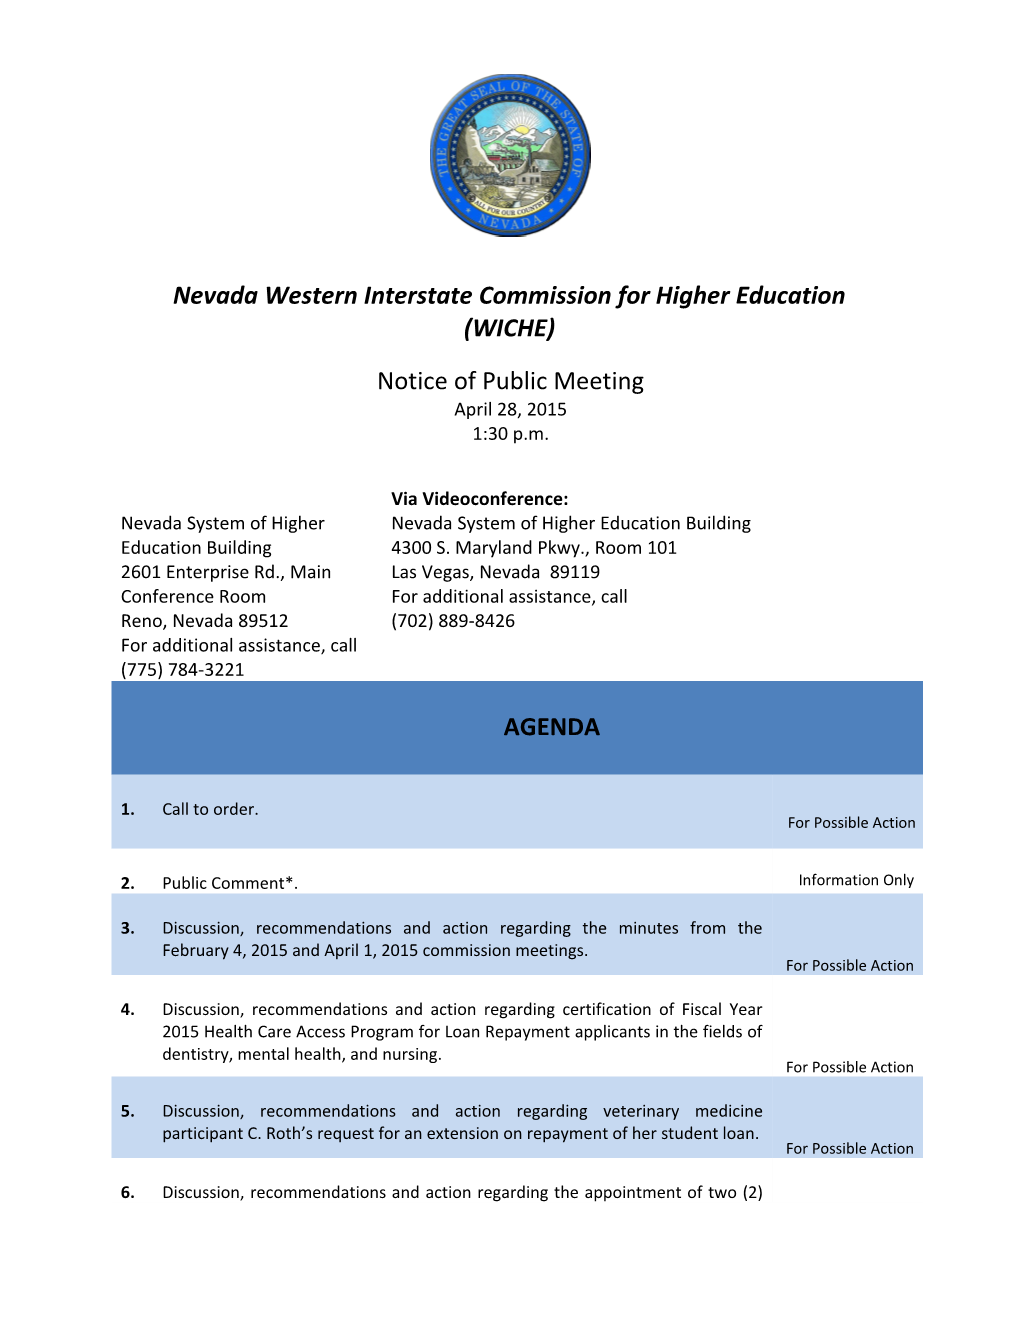 Nevada Western Interstate Commission for Higher Education